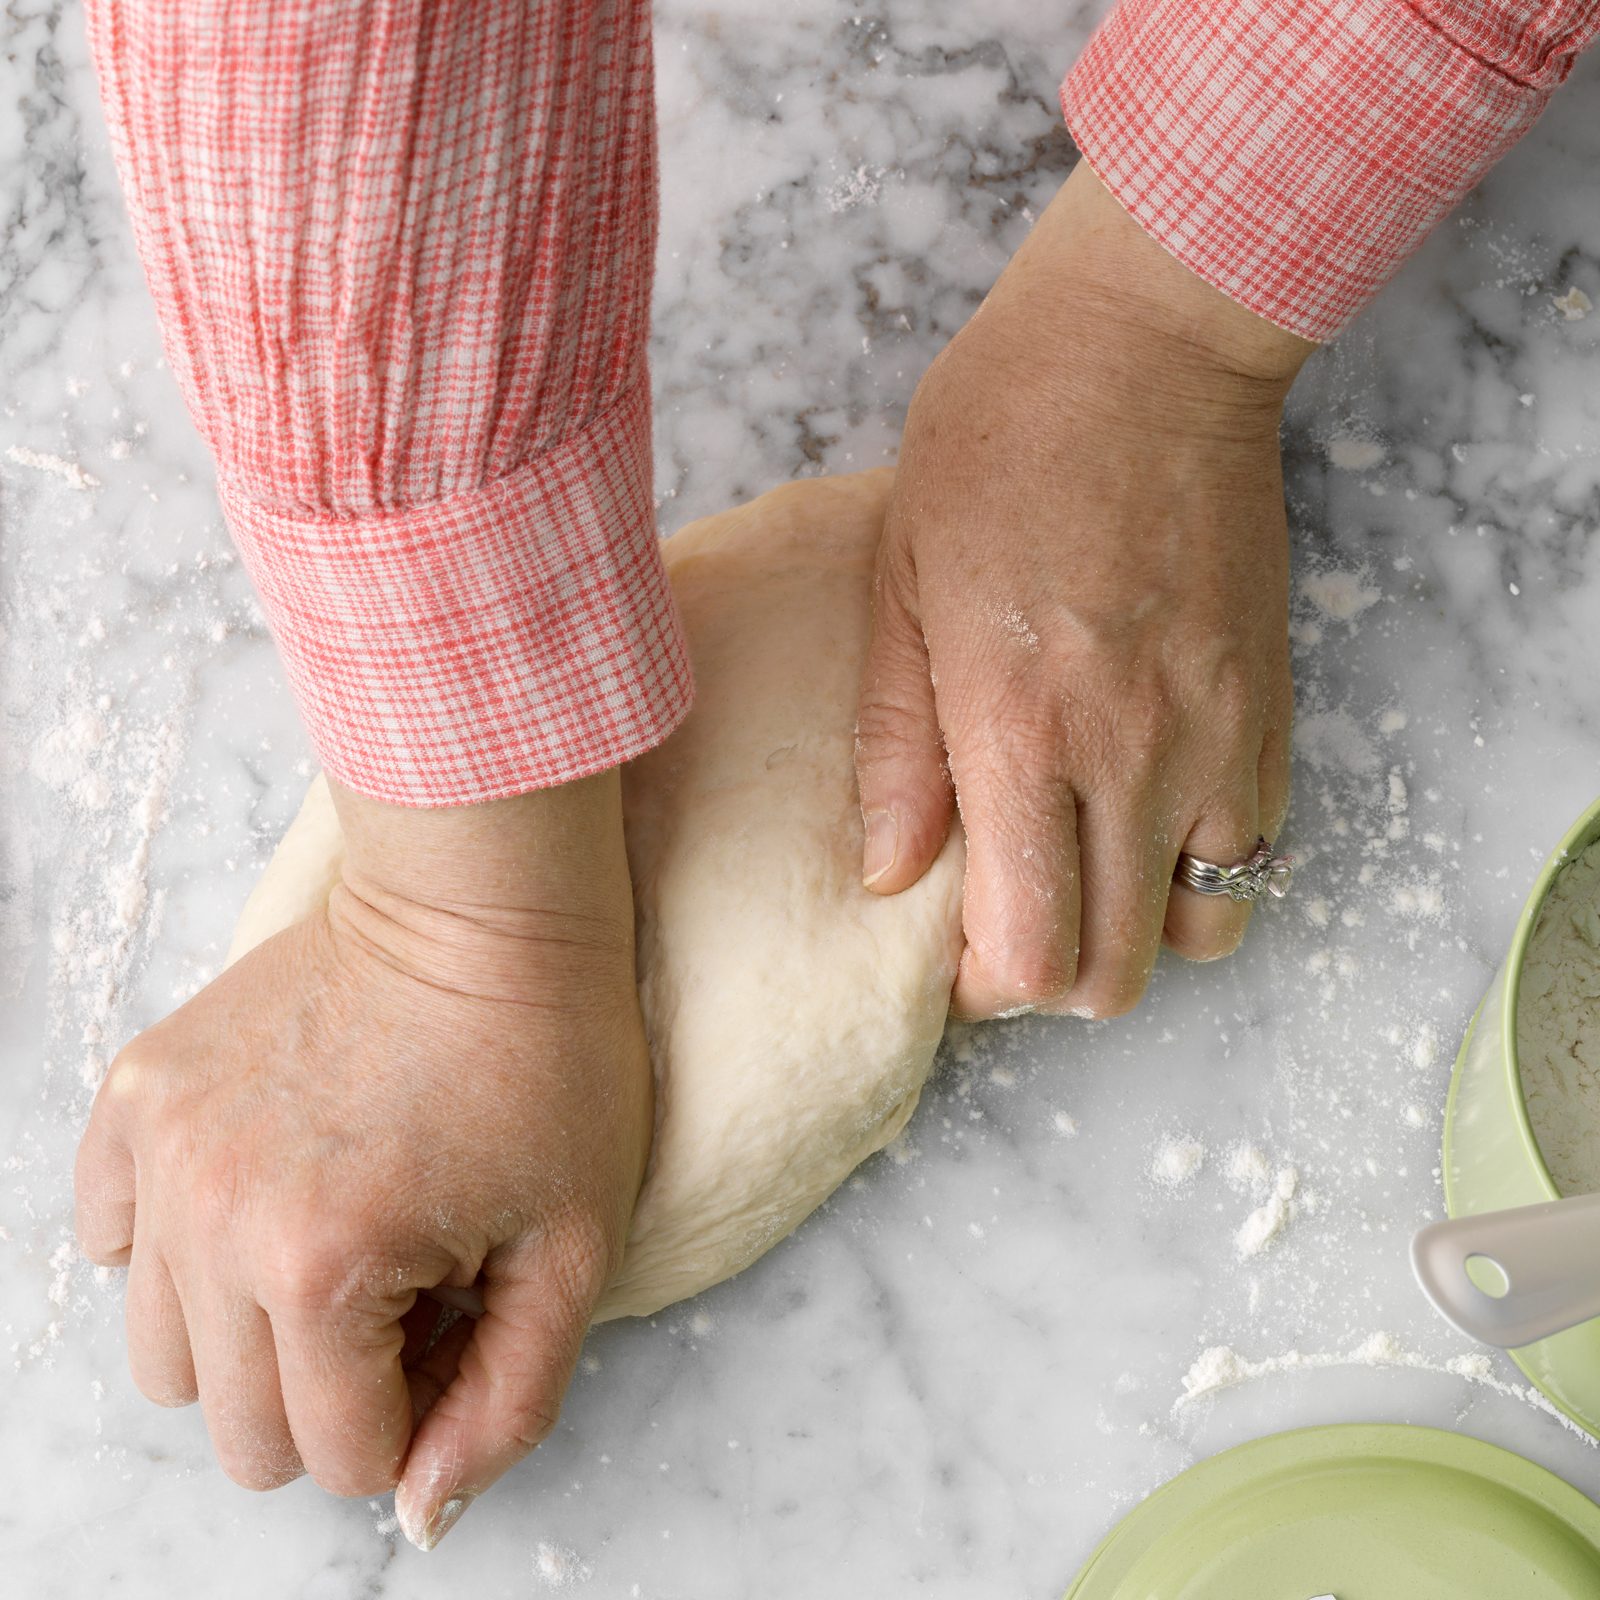 hands stretching pizza dough on a counter